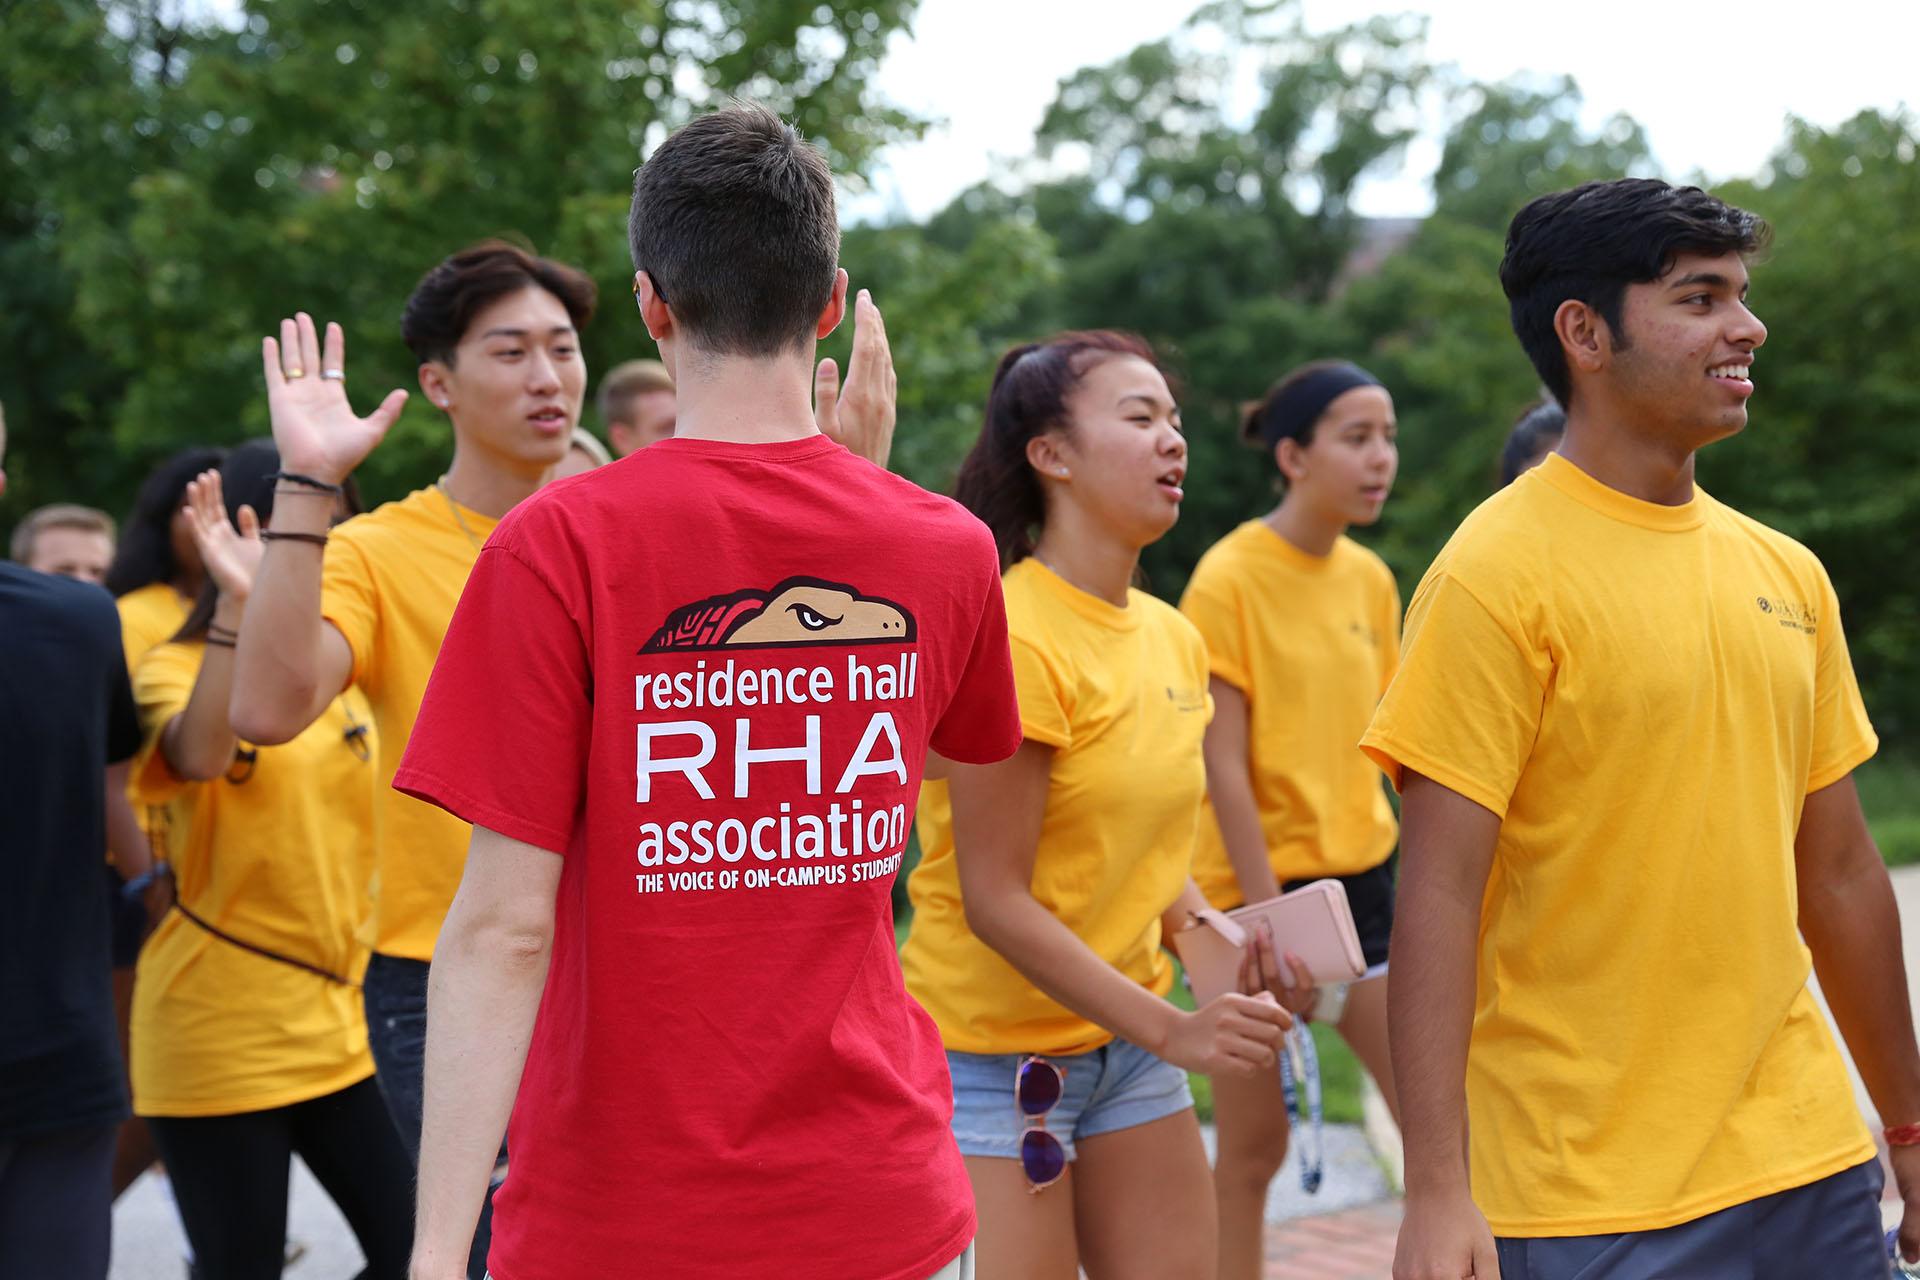 student wearing red RHA shirt high-fiving other students coming towards him in opposite direction with yellow shirts